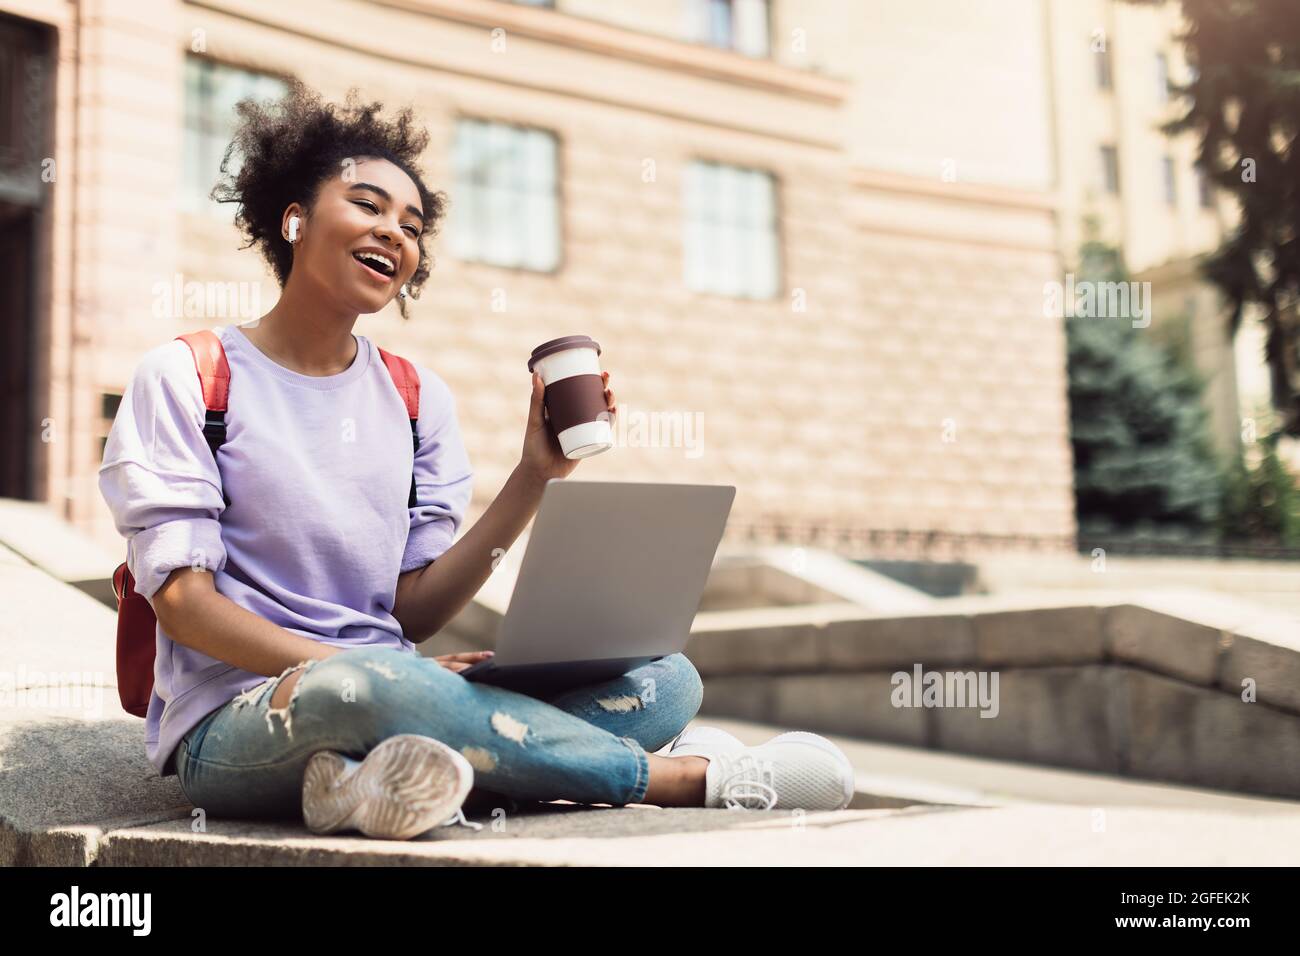 Cheerful Black Girl Chatting Via Video Call On Laptop Outdoor Stock Photo